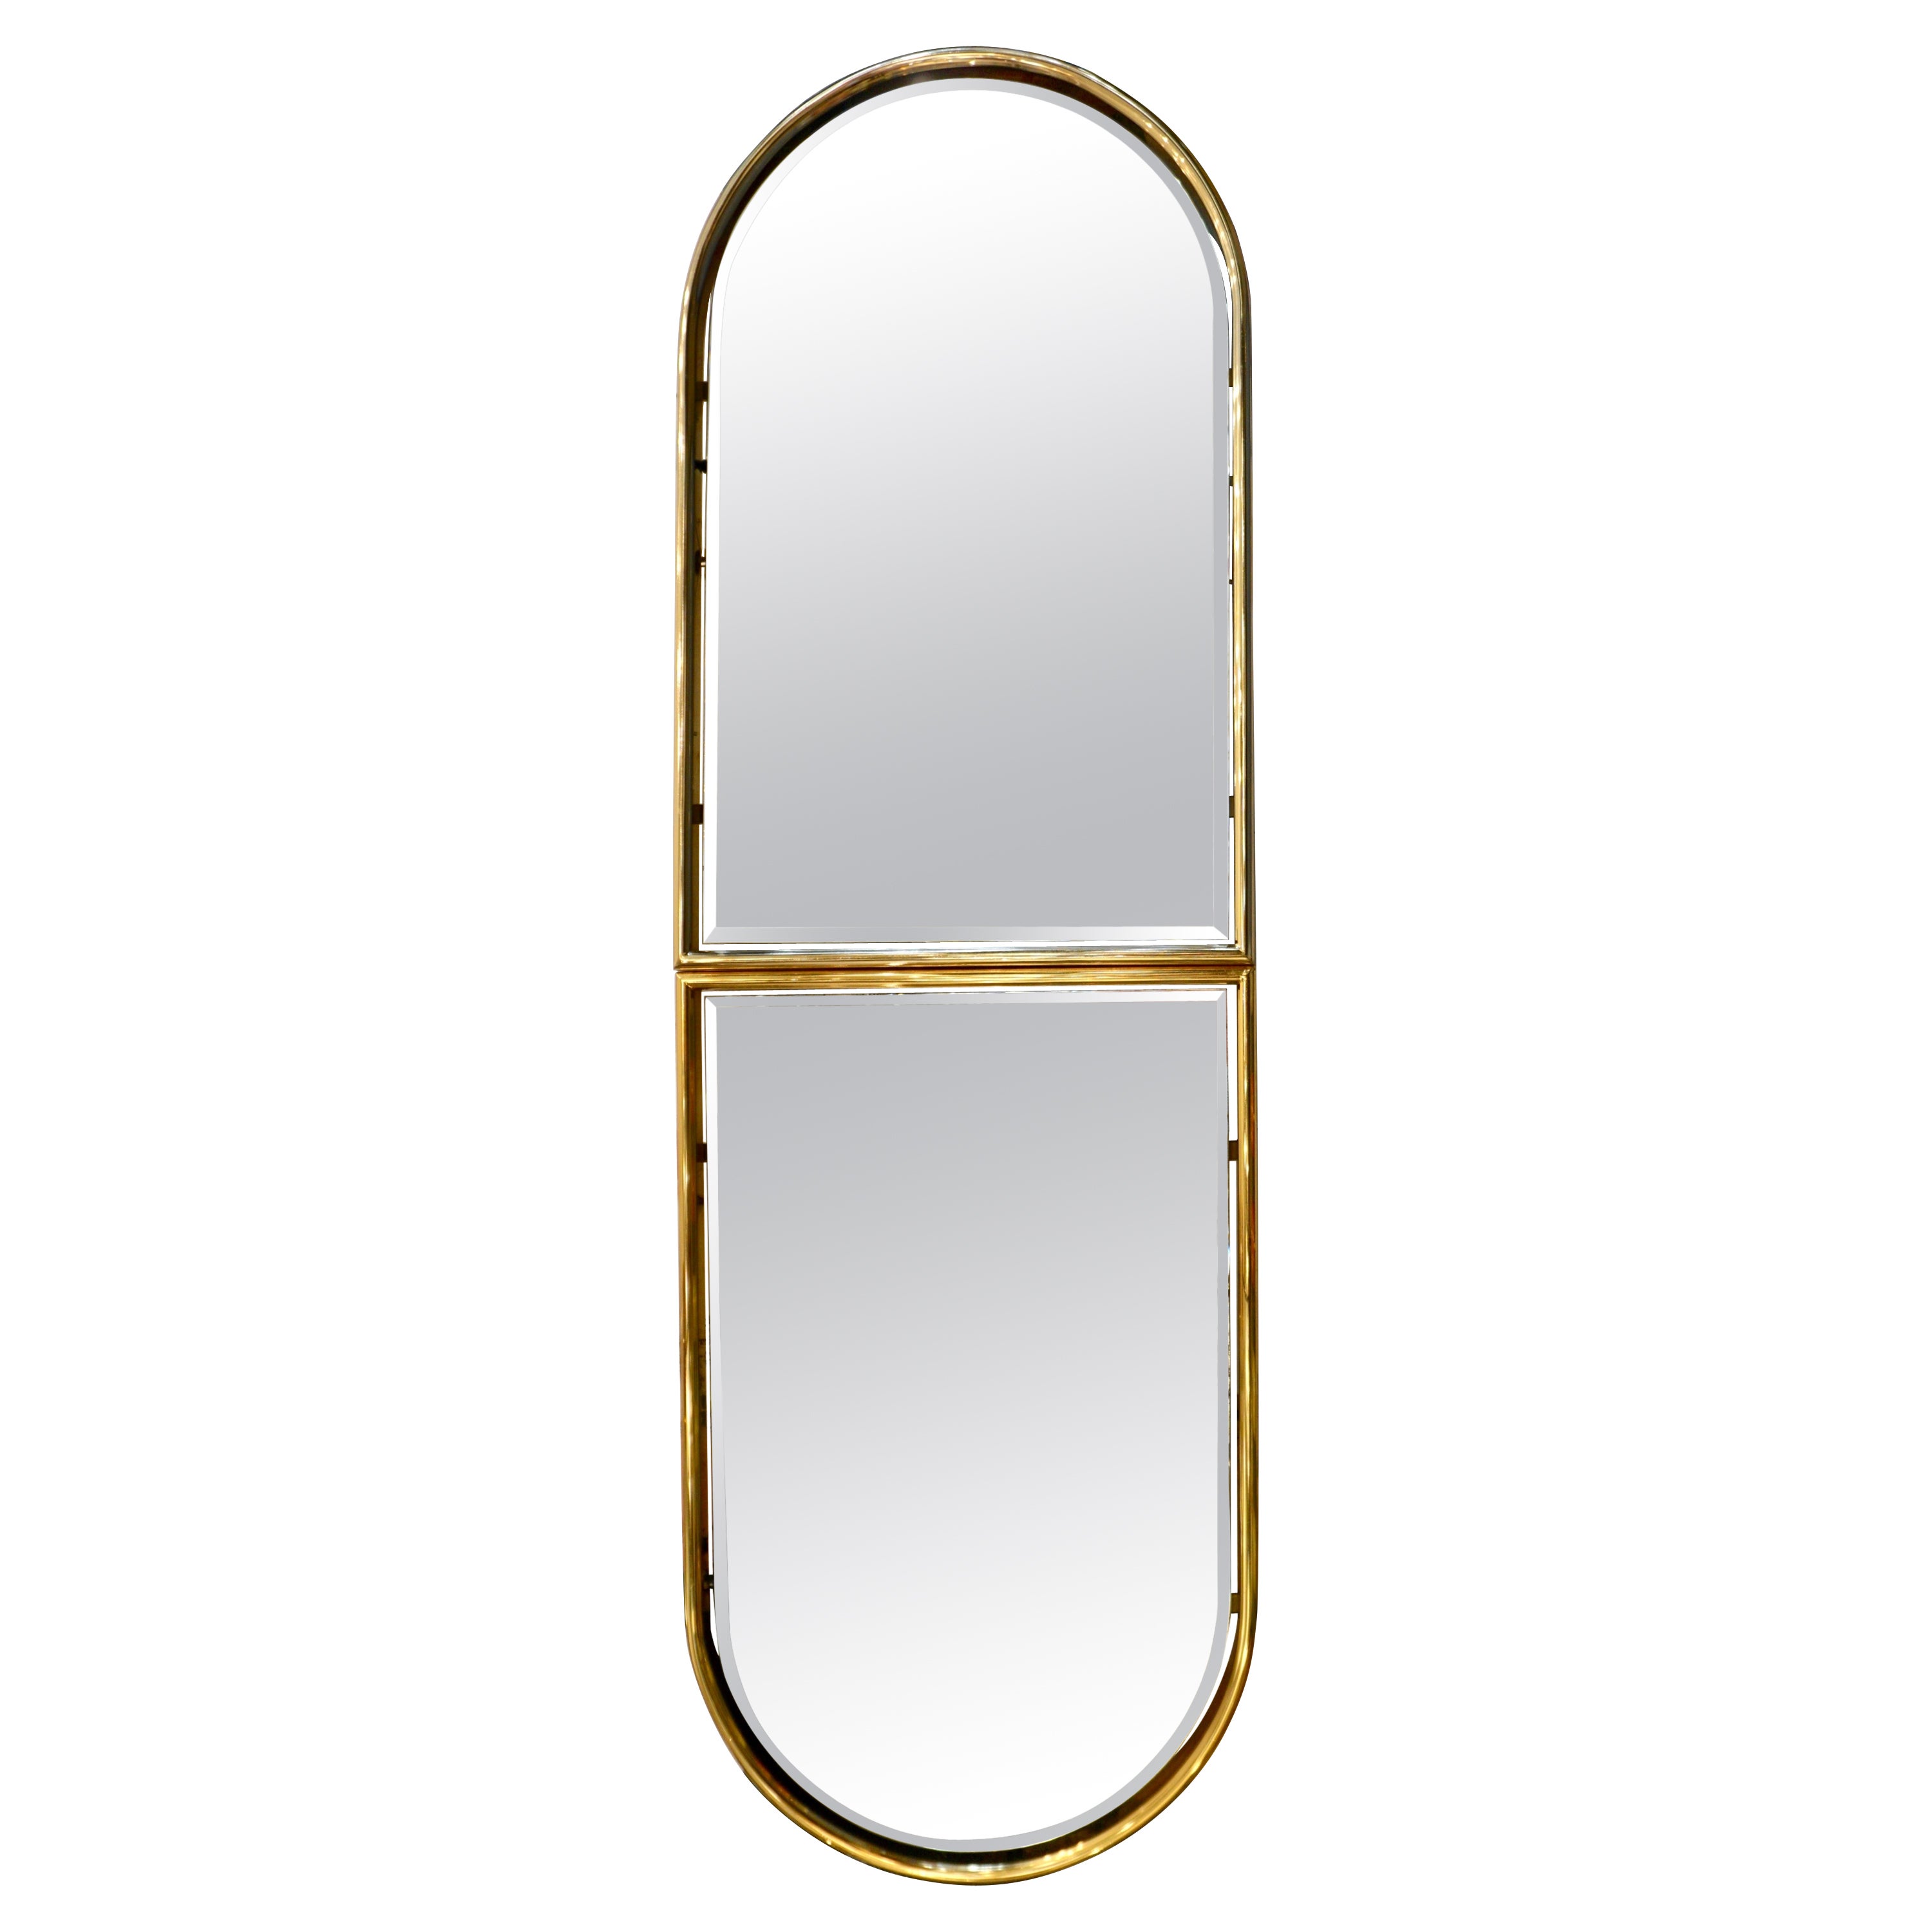 1960s Italian Minimalist Brass Full Floating Mirror with Round Arched Top Frame For Sale